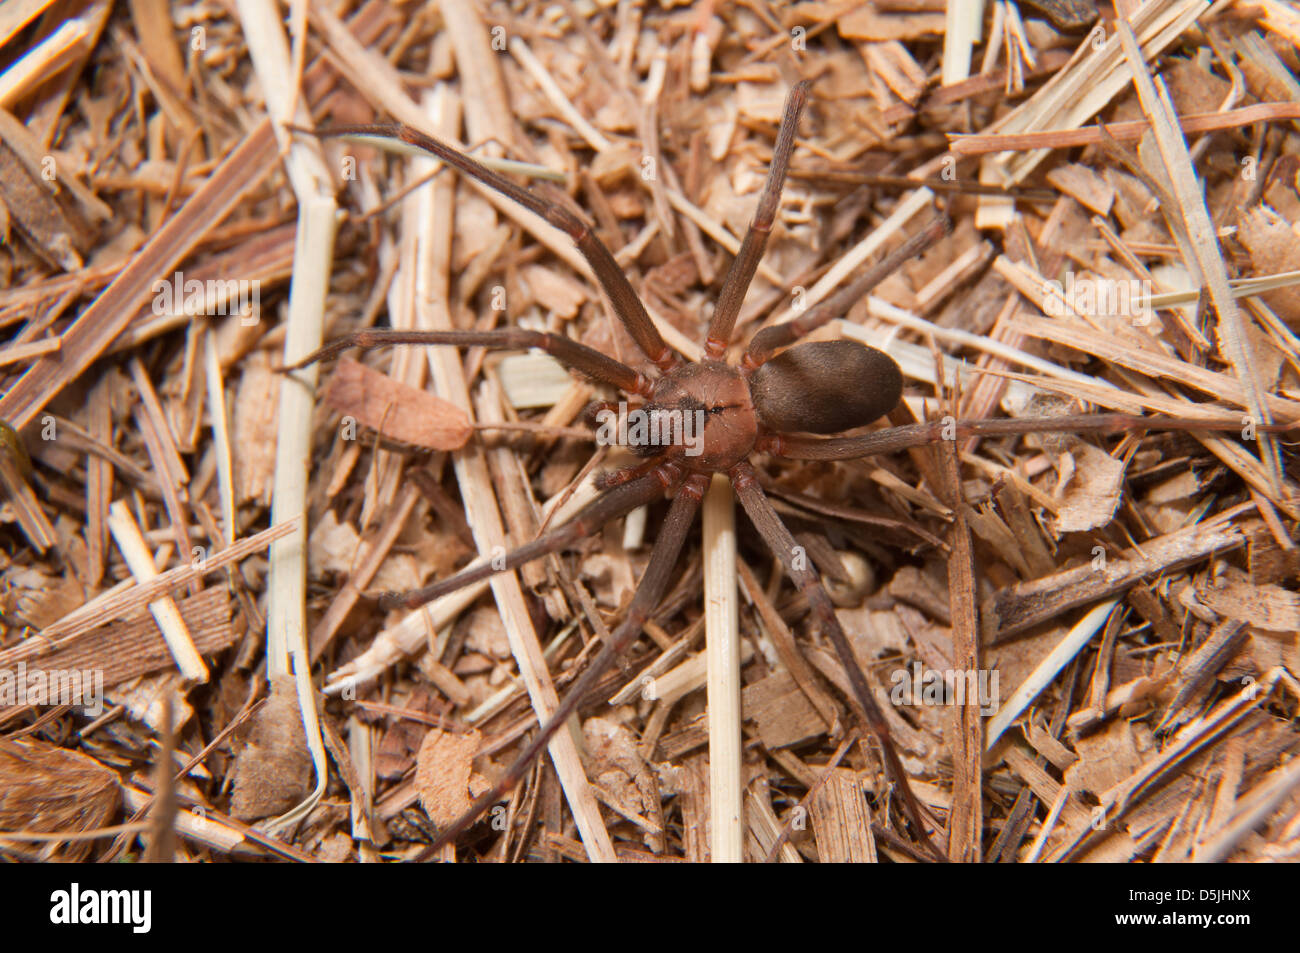 Closeup image of a Brown Recluse, Loxosceles reclusa, a venomous spider camouflaged on dry winter grass Stock Photo